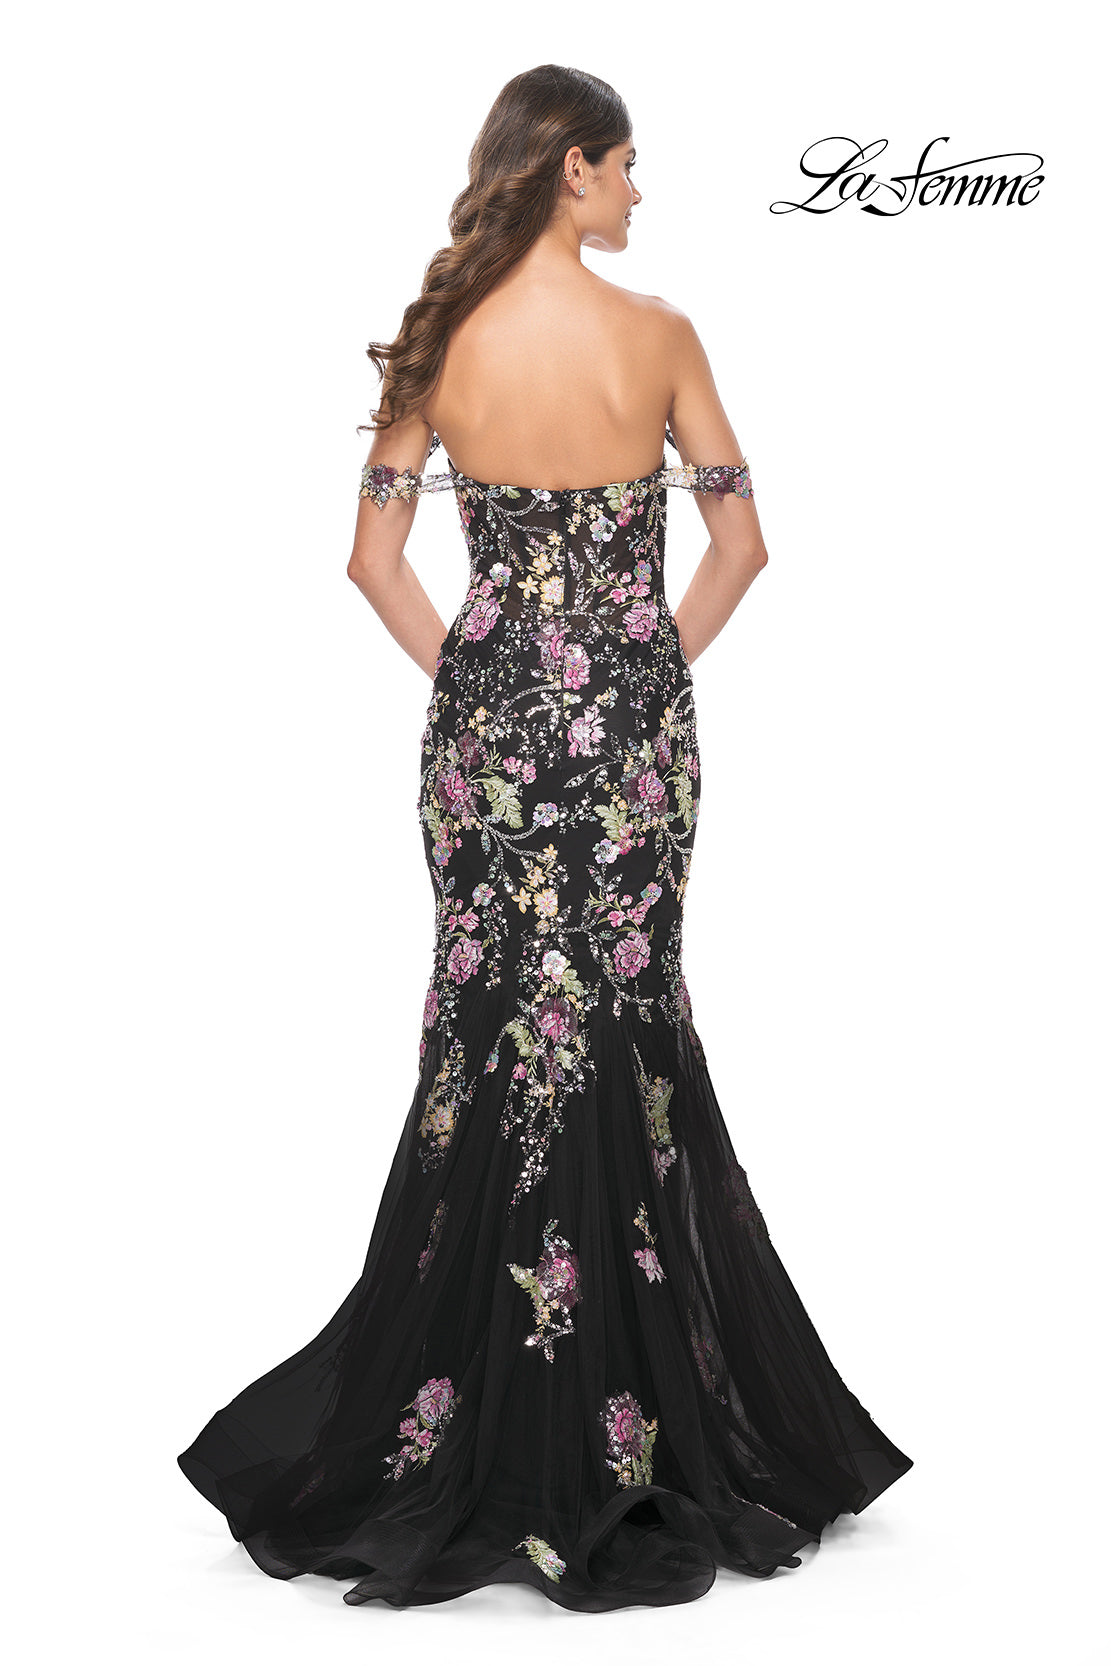 Off Shoulder Sequined Floral Mermaid Gown